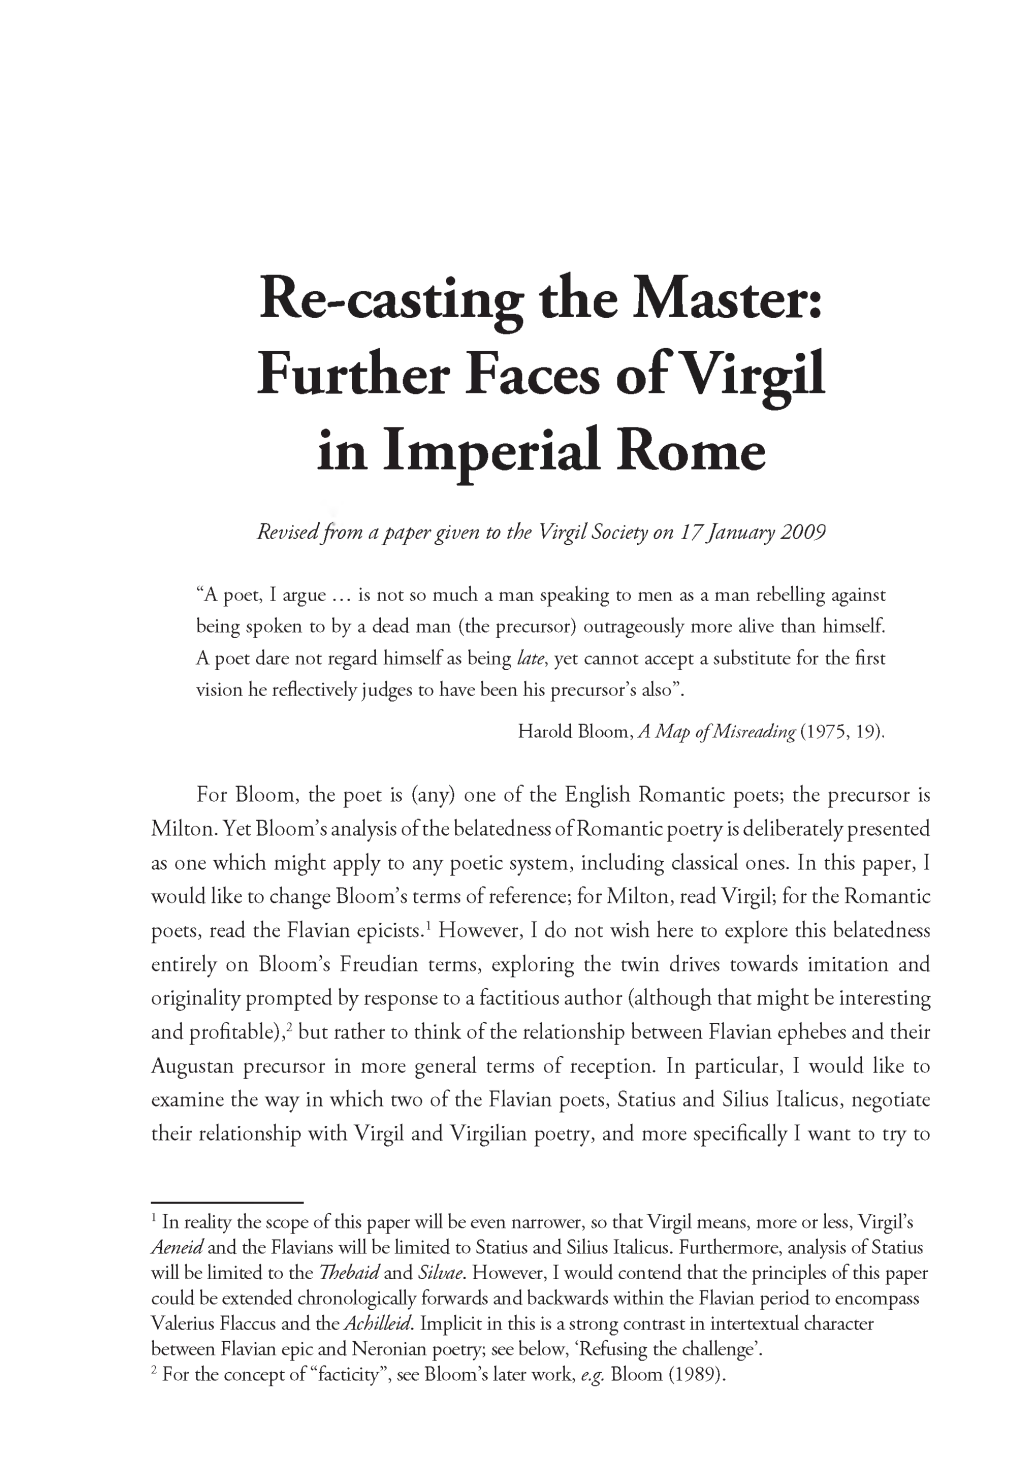 Re-Casting the Master: Further Faces of Virgil in Imperial Rome